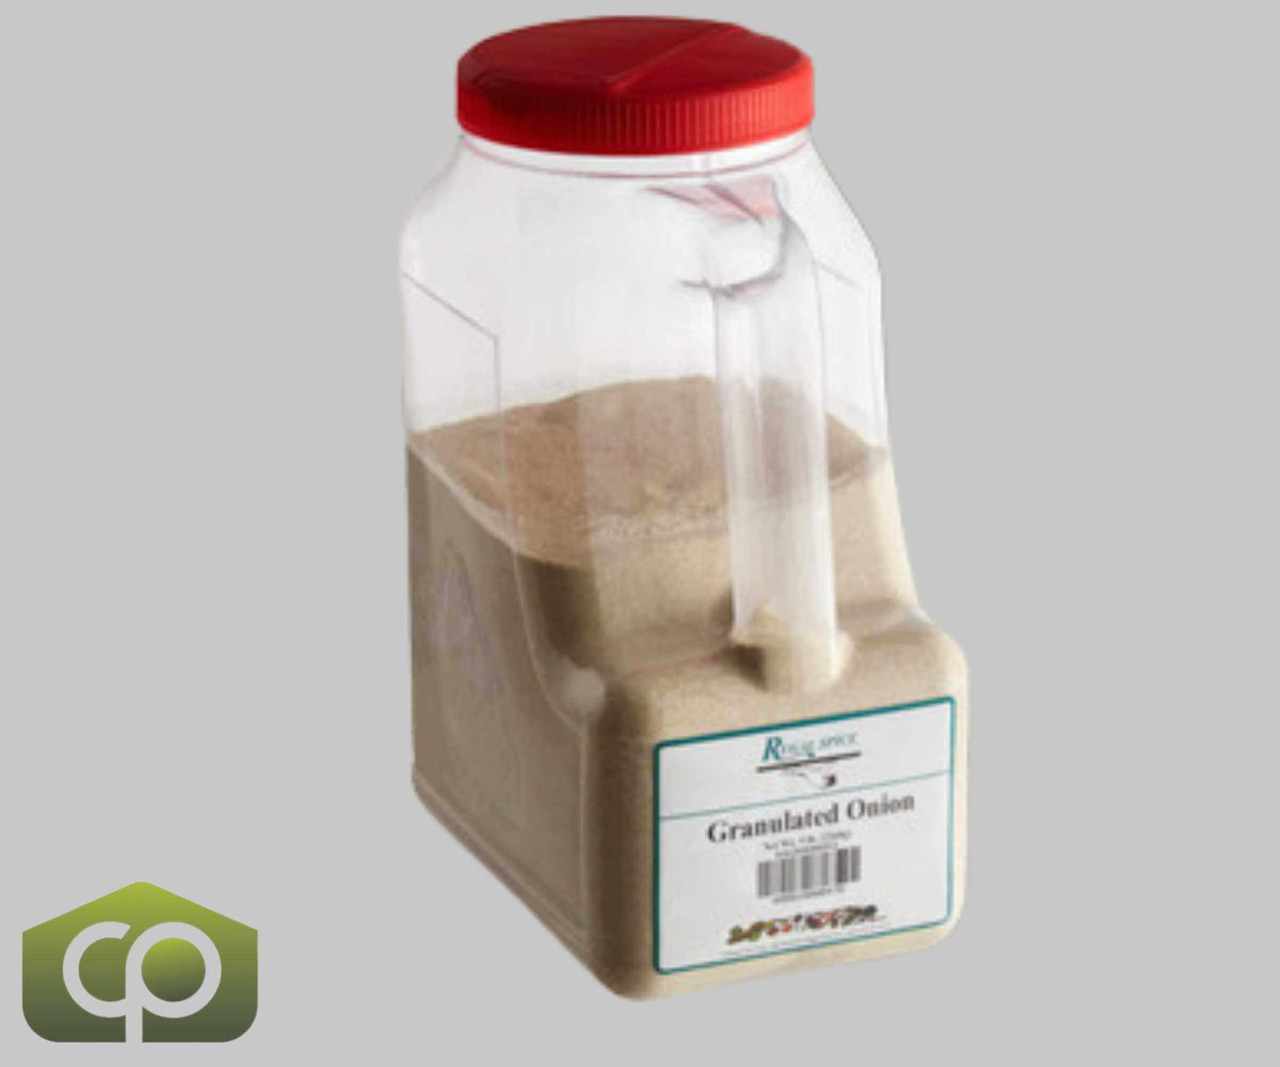 Chicken Pieces CP Granulated Onion | 5 lb/2.27 kgs